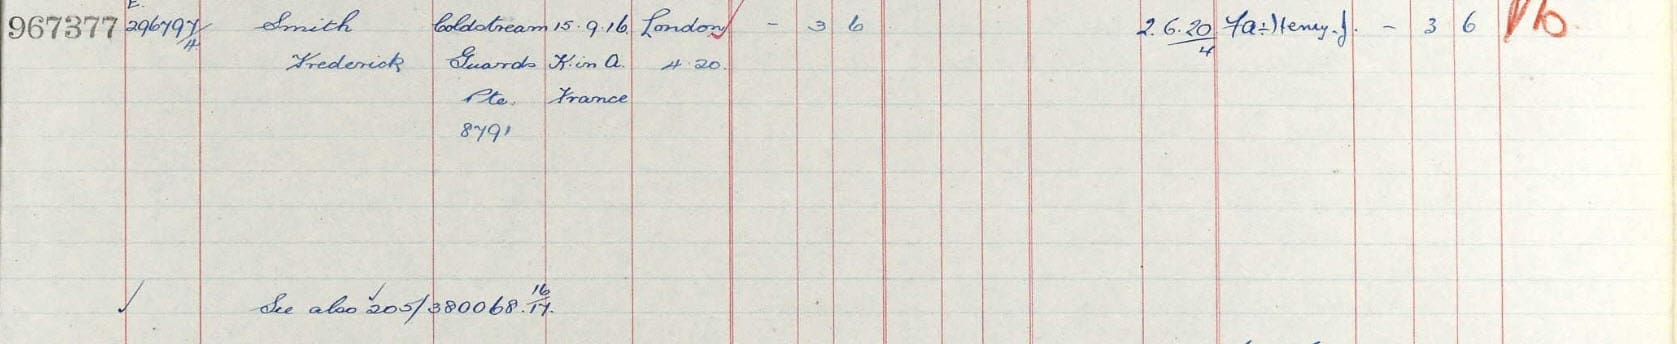 UK, Army Registers of Soldiers' Effects, 1901-1929 for Frederick Smith